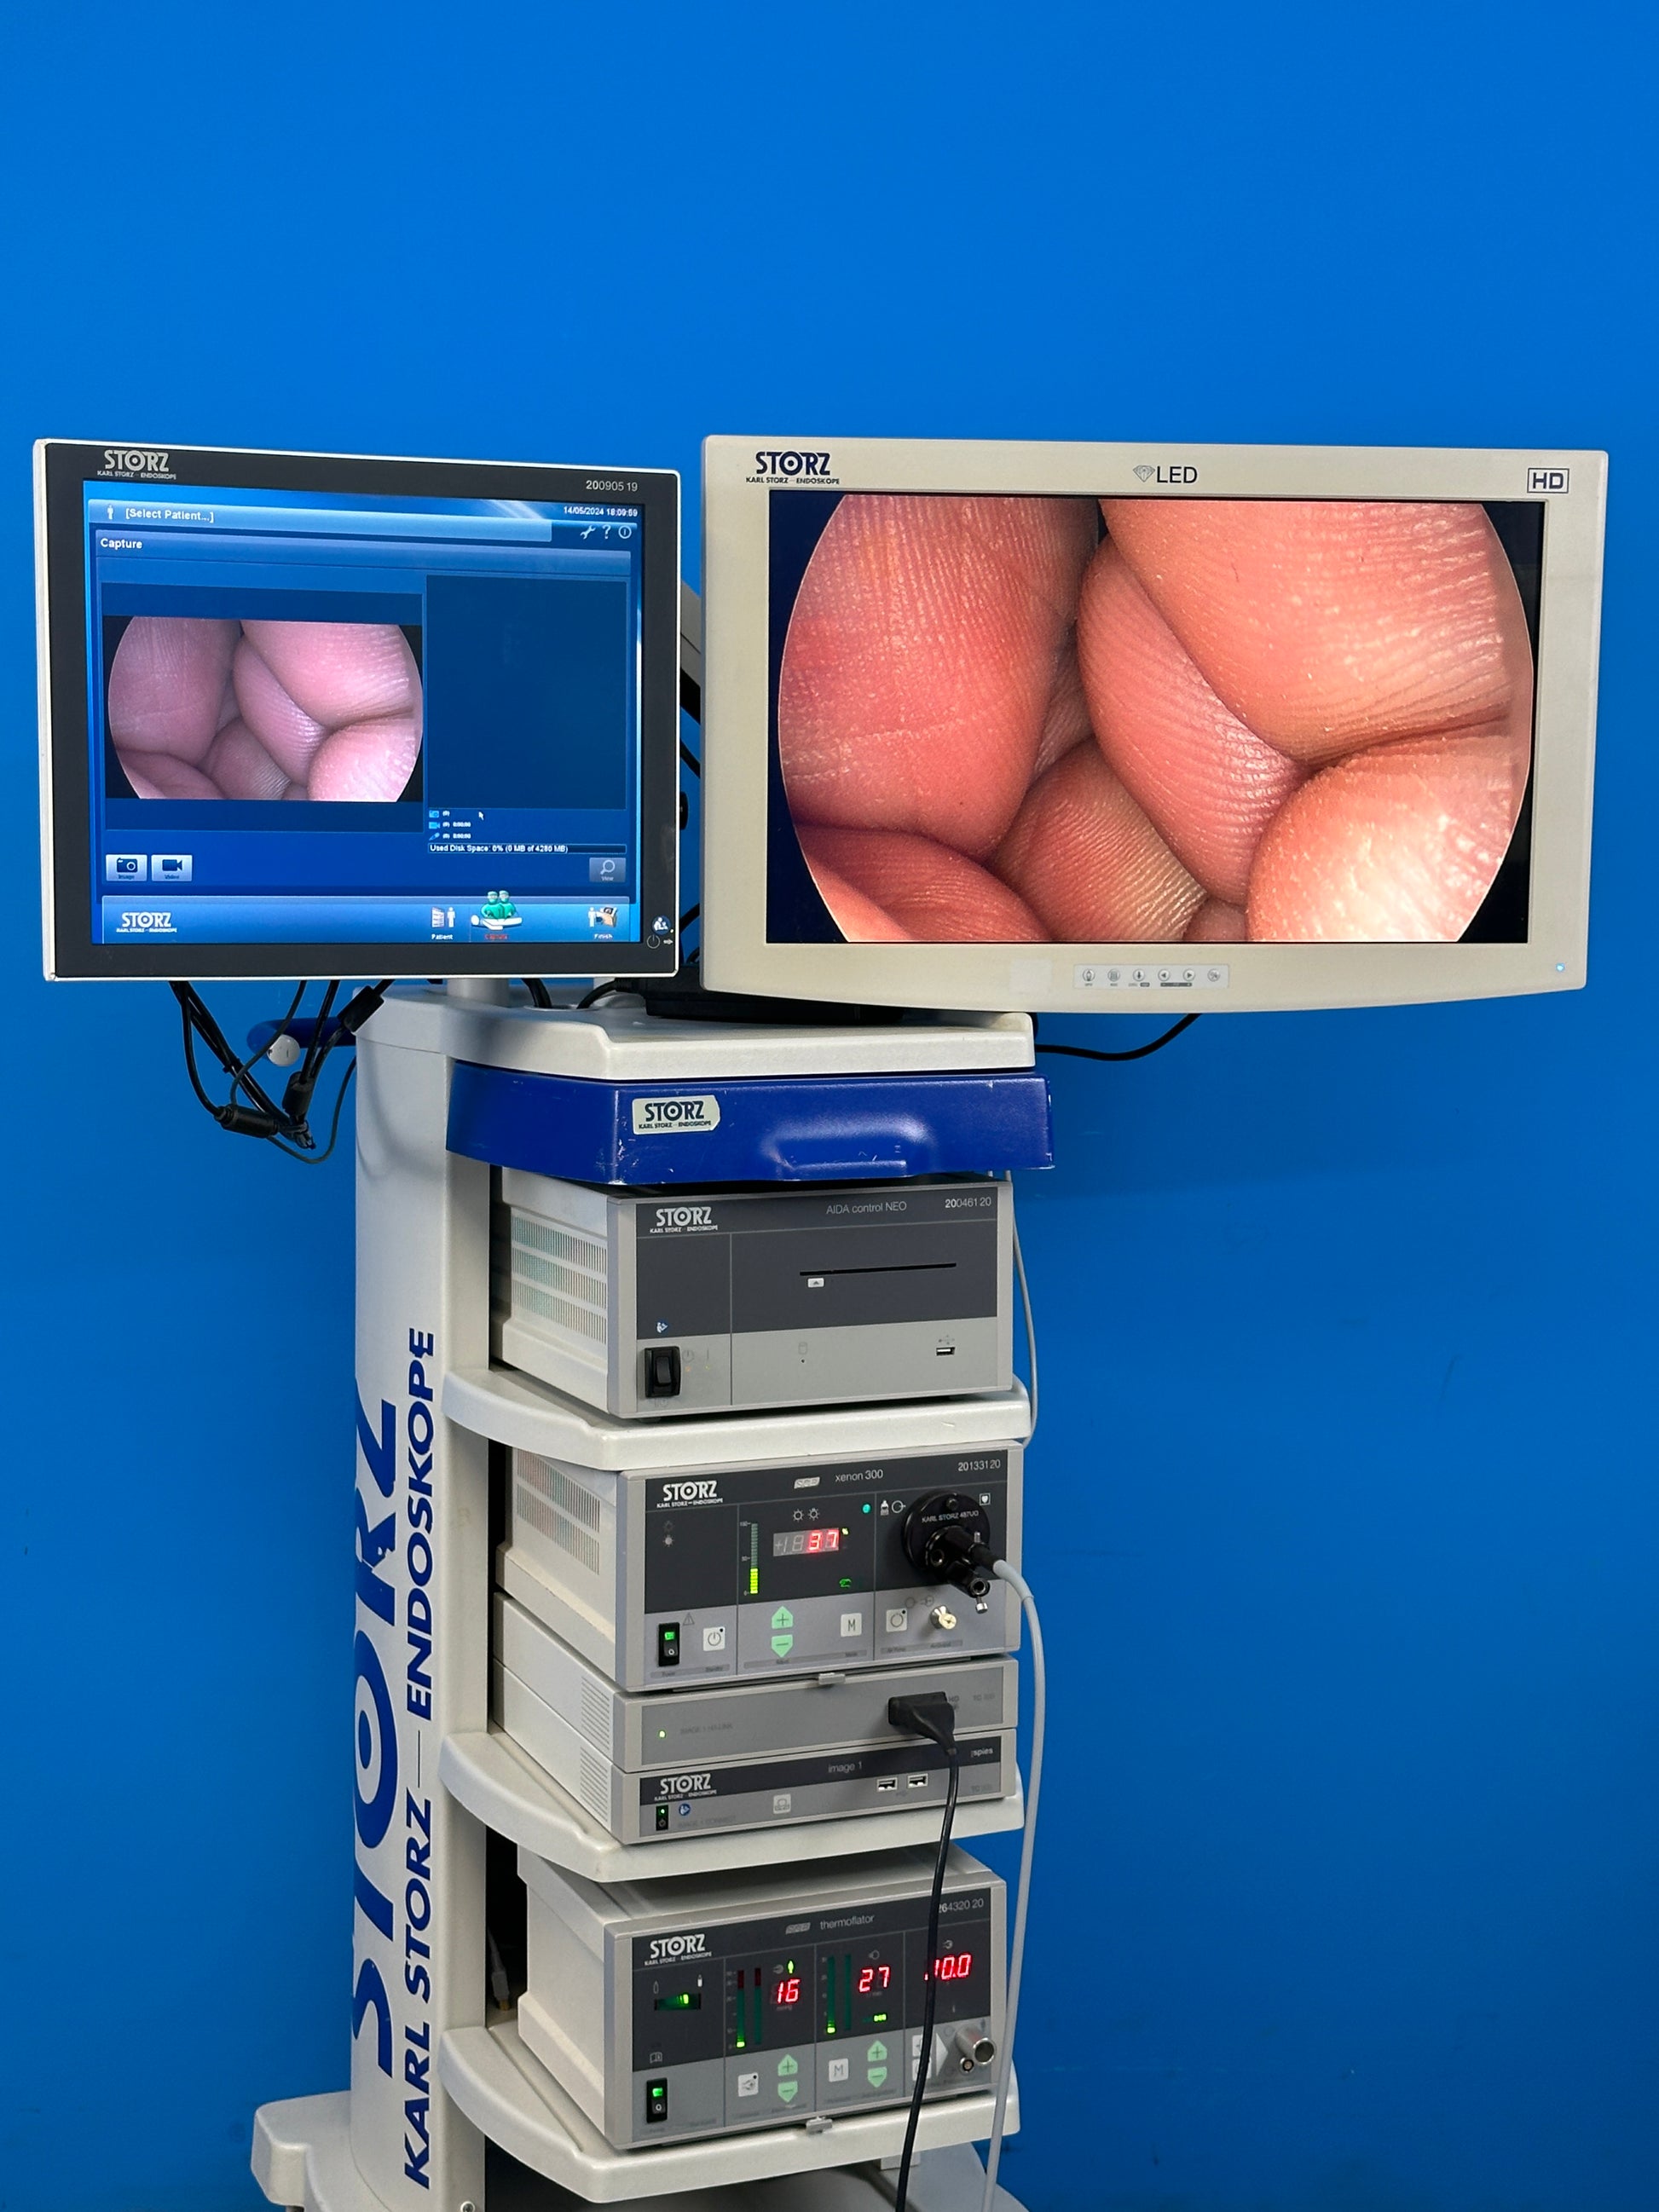 Storz spies IMAGE1 S™ is a modular camera platform that combines various technologies (e.g., rigid, flexible, and 3D endoscopy as well as FULL HD and 4K imaging). NIR/ICG Fluorescence.